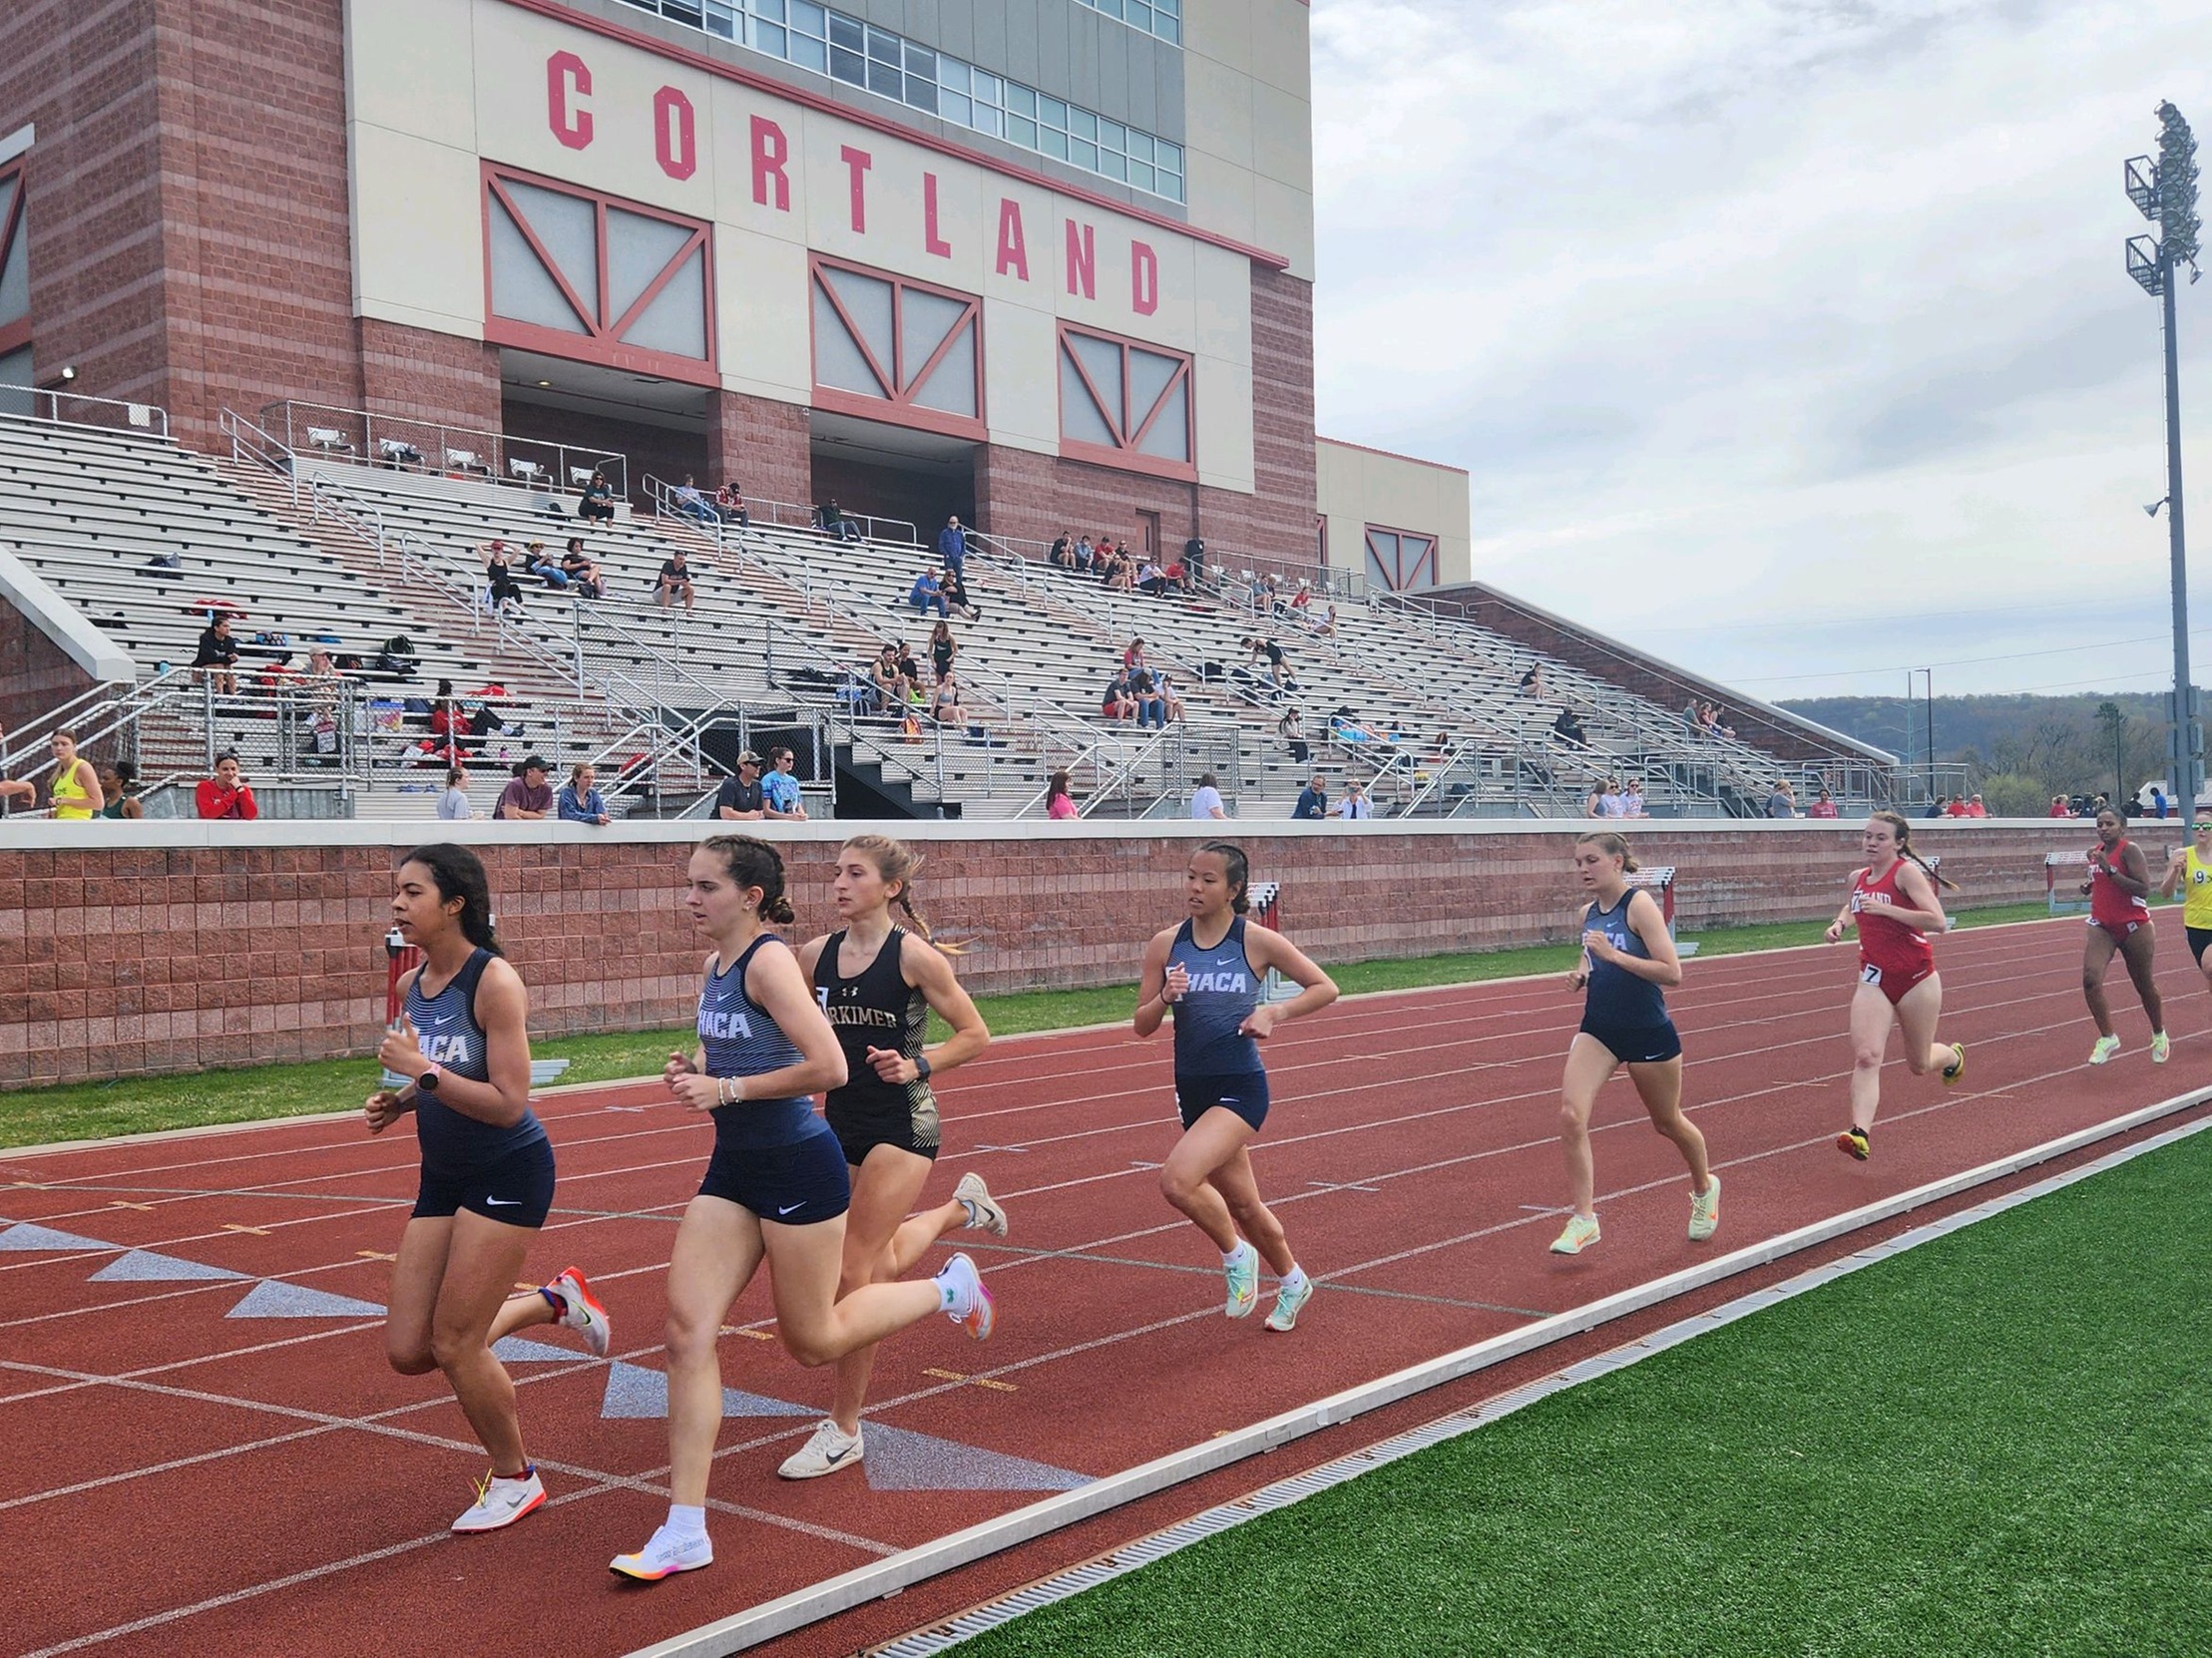 The Generals competed at SUNY Cortland in the “Upstate Alternative Meet”